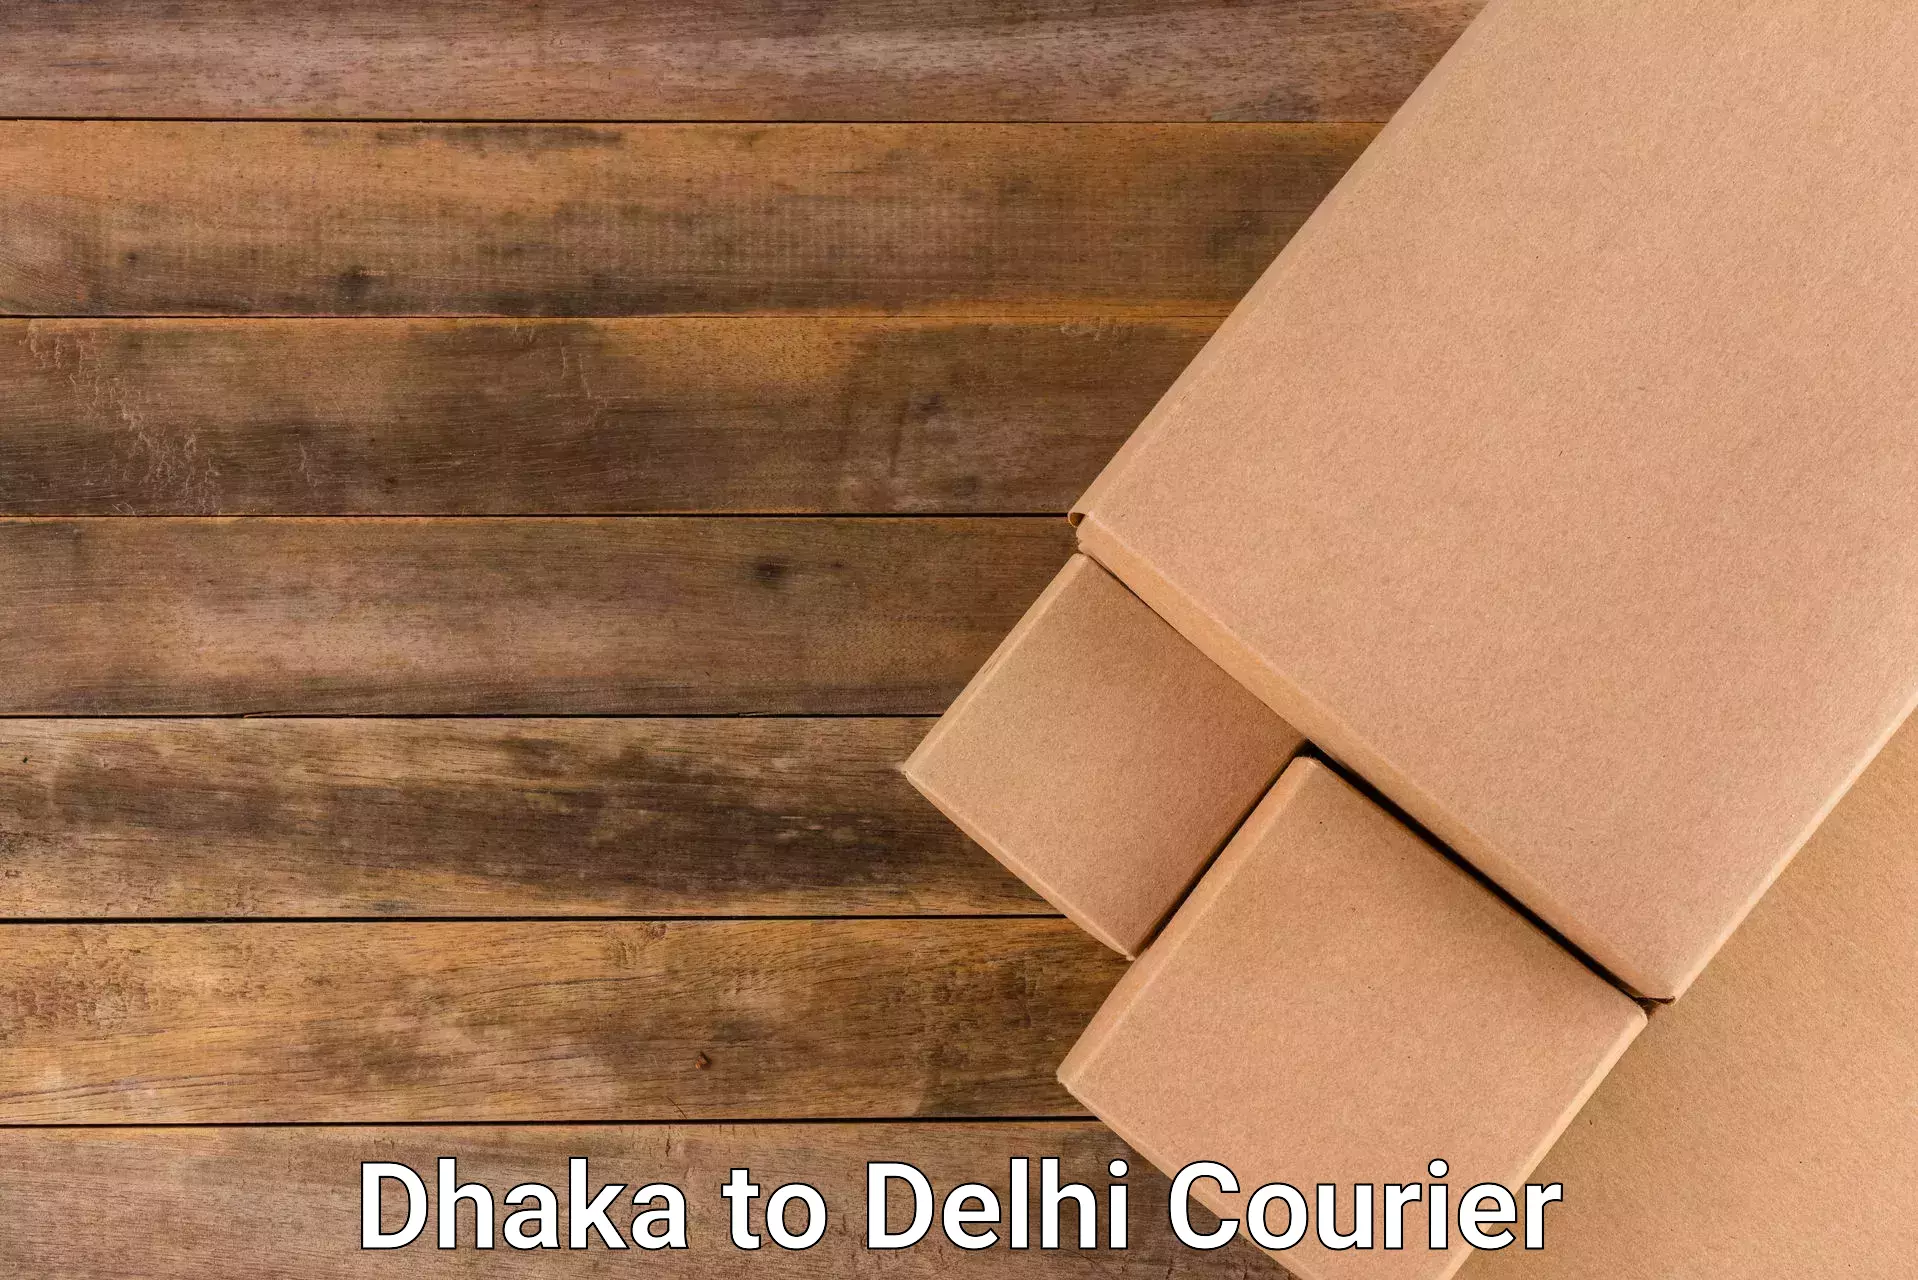 Nationwide delivery network Dhaka to Delhi